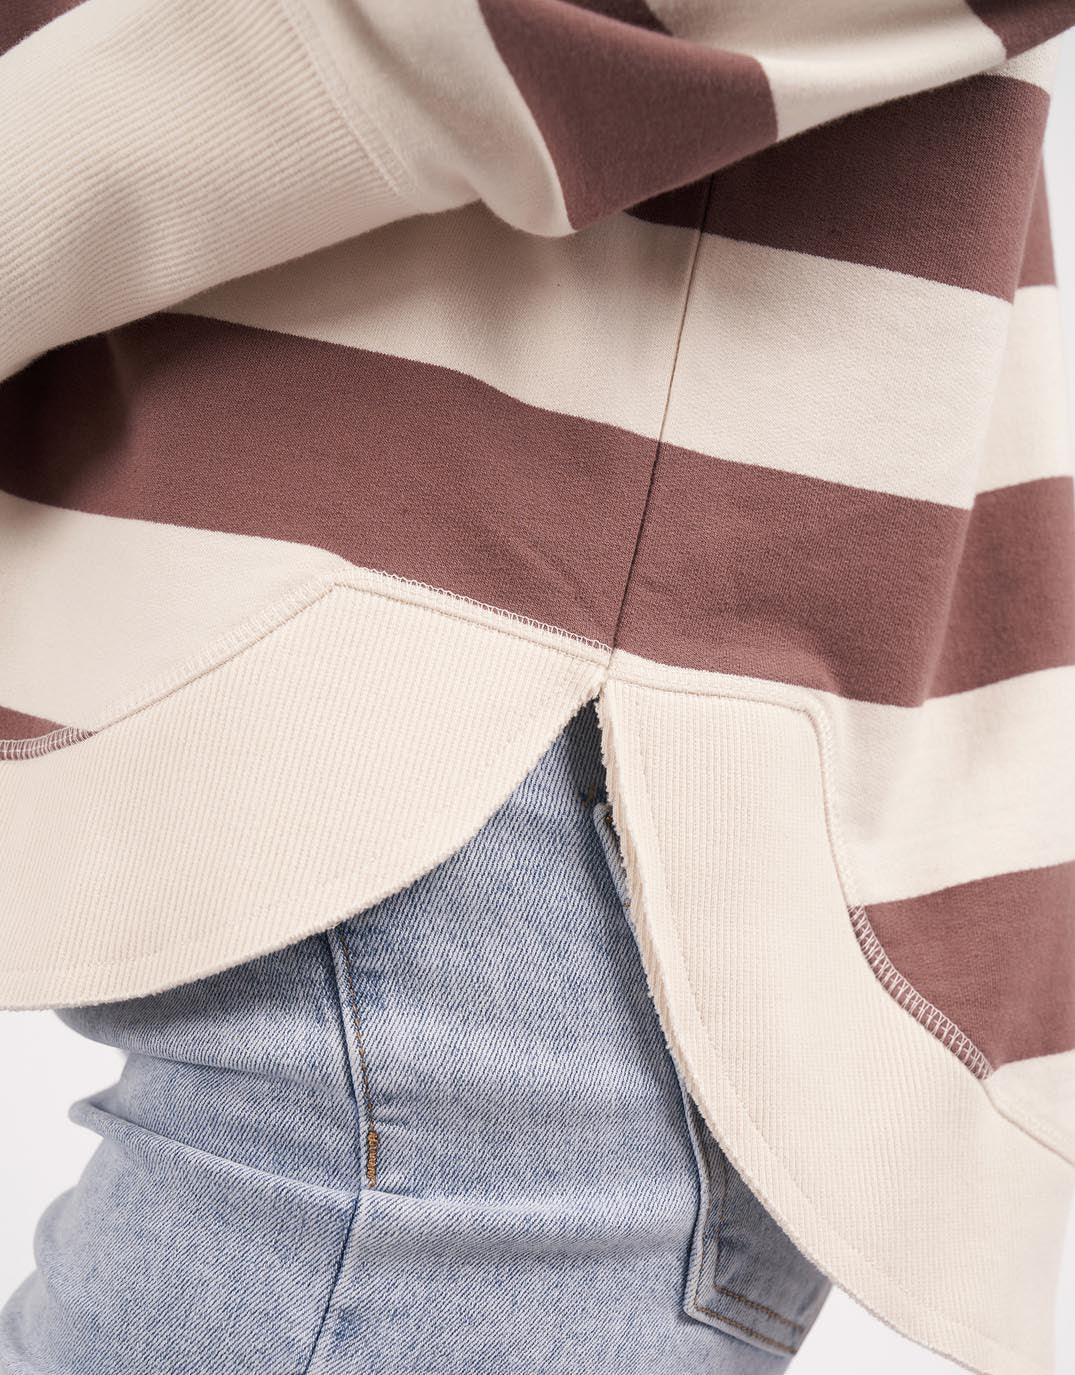 Foxwood - Striped Delilah Crew - Mocha - White & Co Living Jumpers